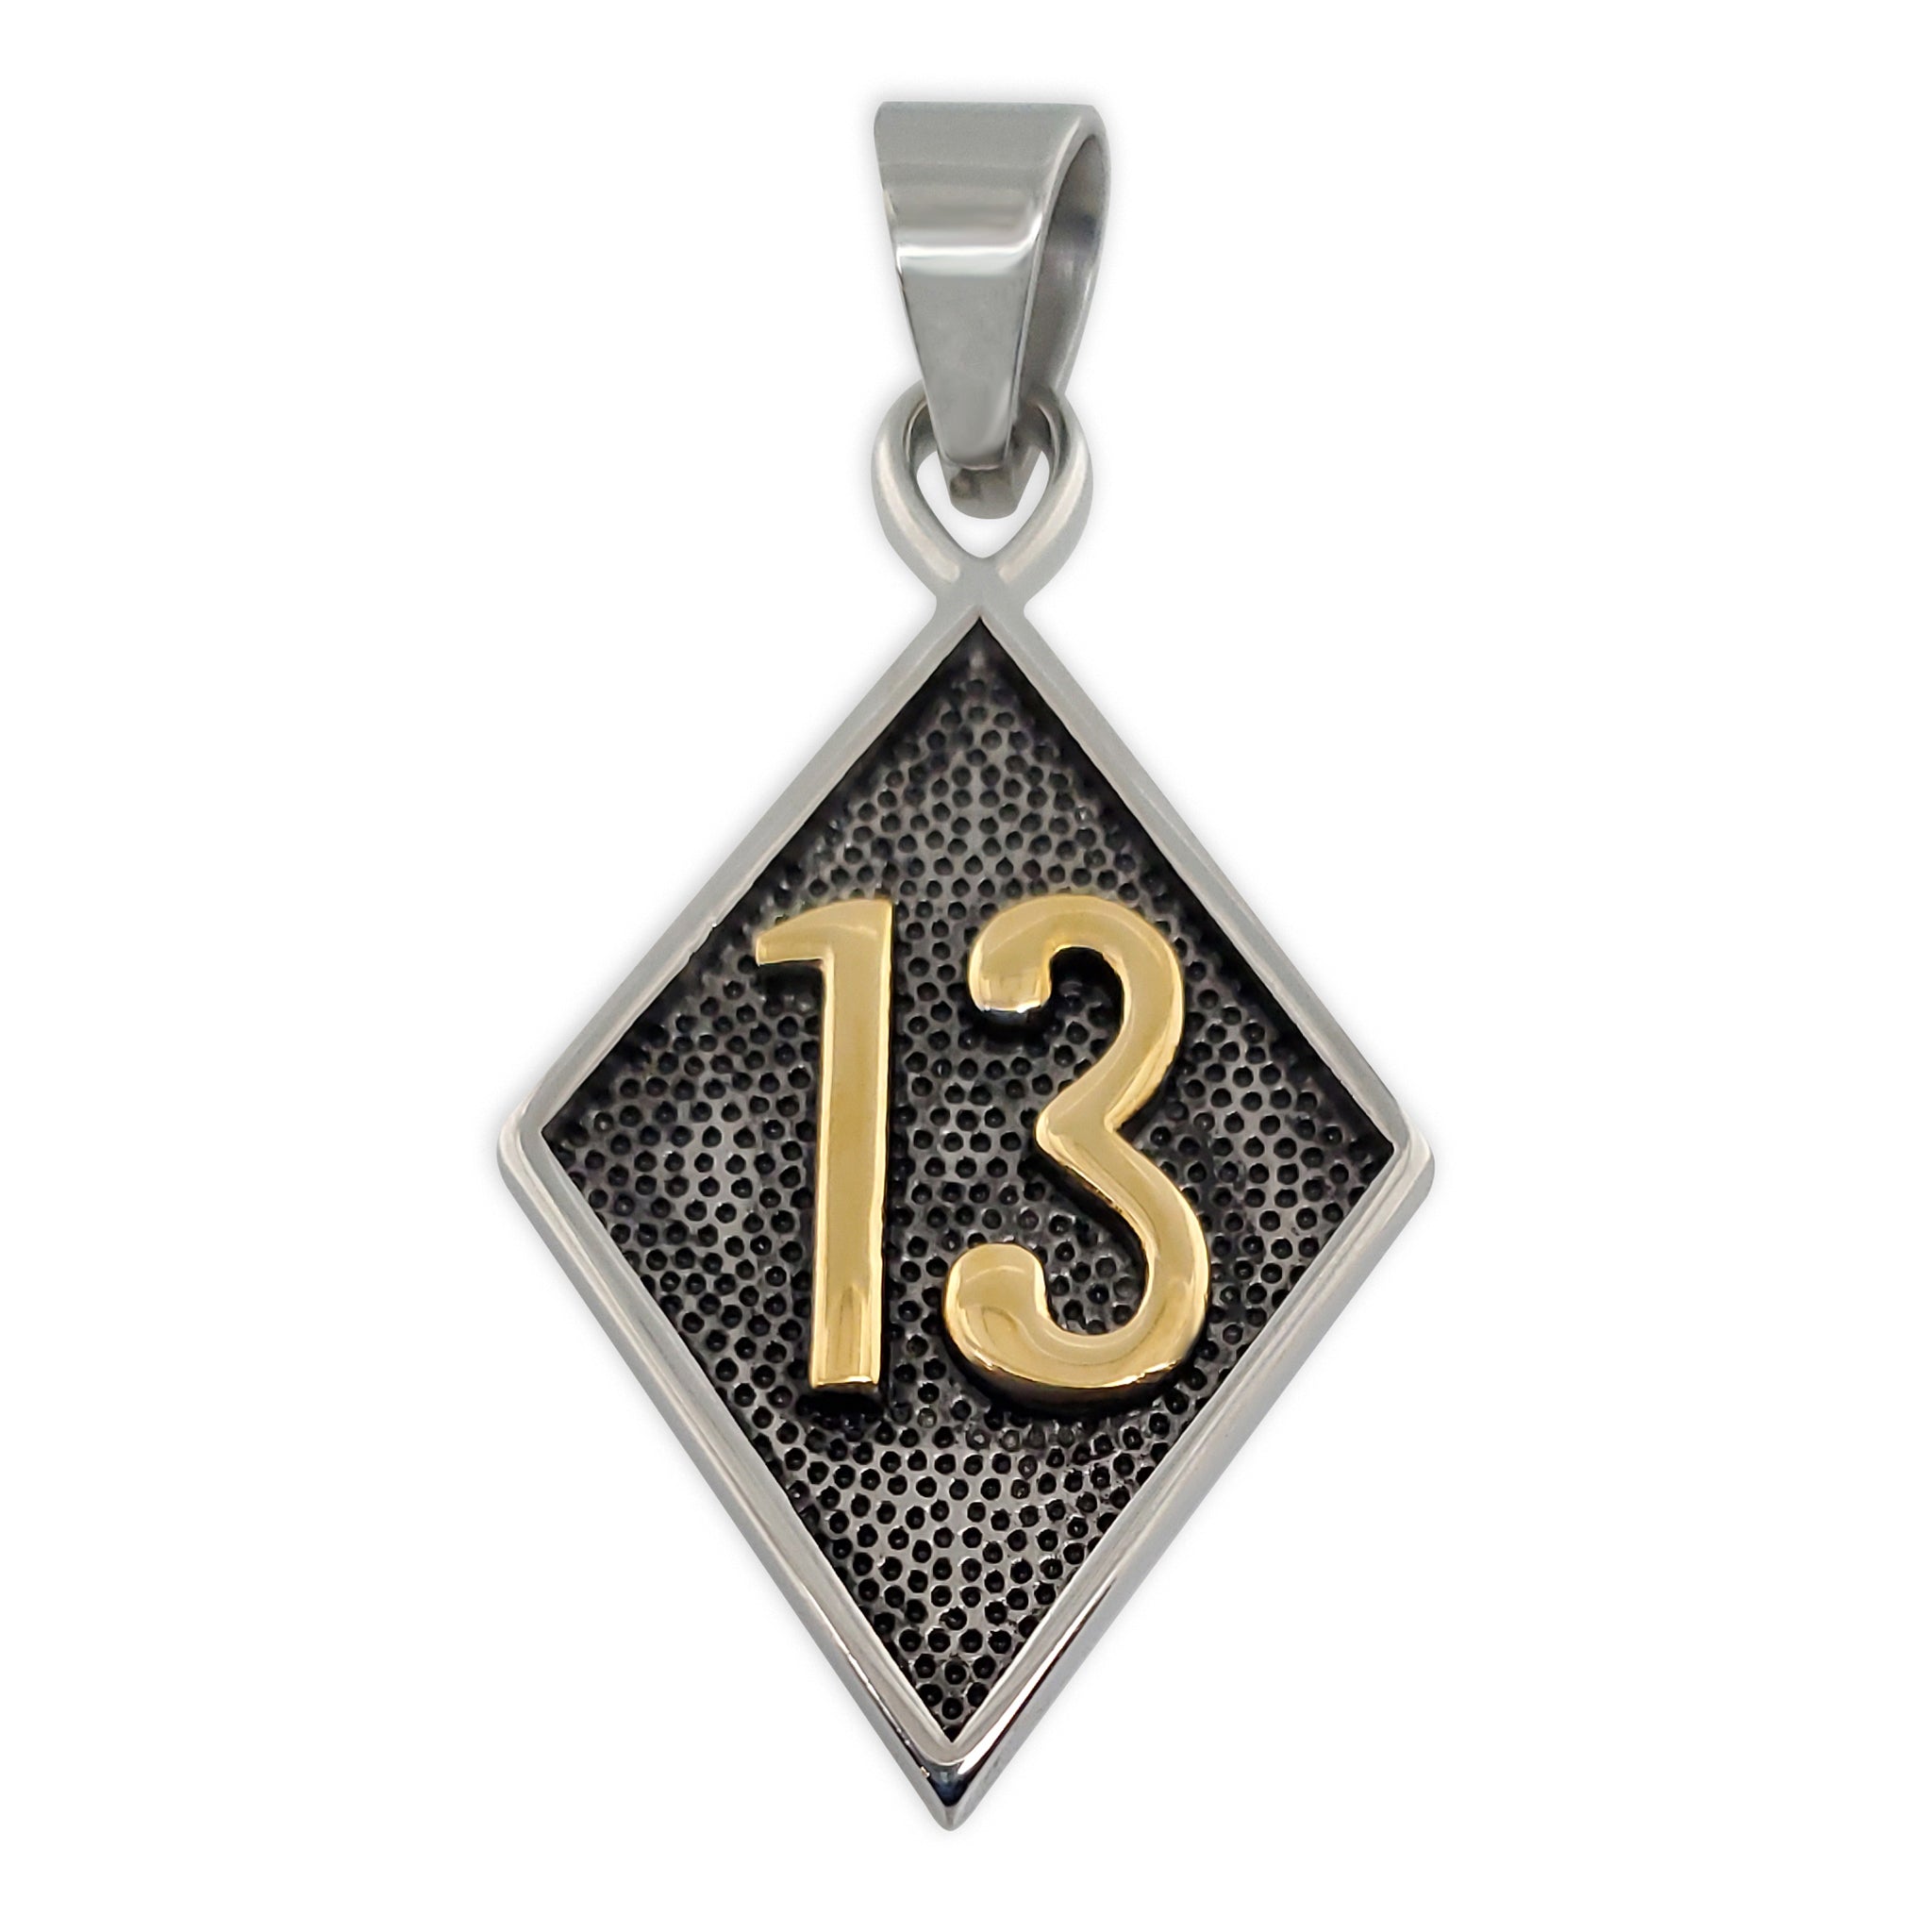 ''Stainless Steel and 18K GOLD Plated ''''13'''' Pendant / PDC9018''